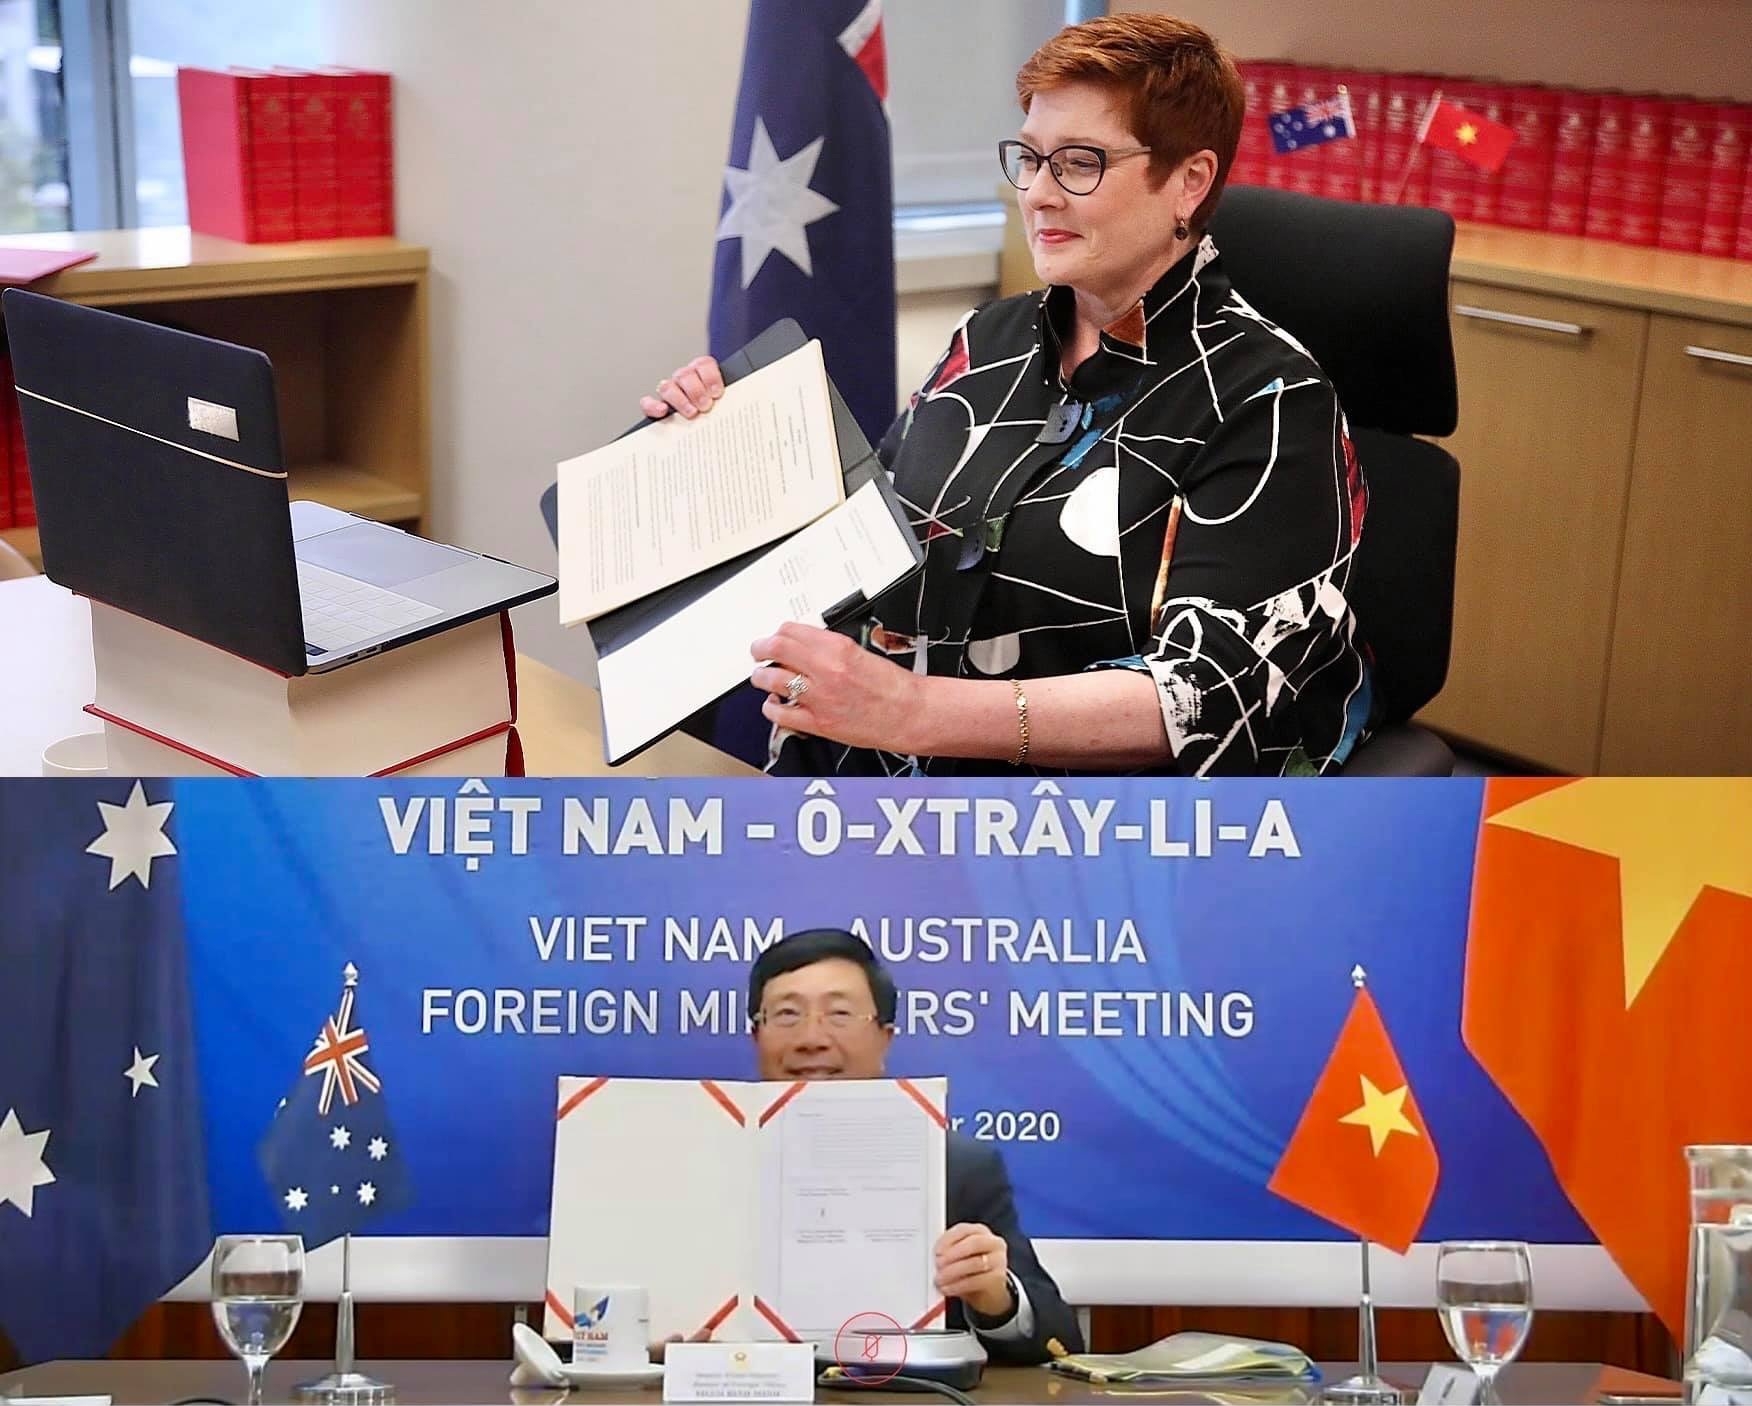 Australia wants to raise bilateral relationship with Vietnam to new heights